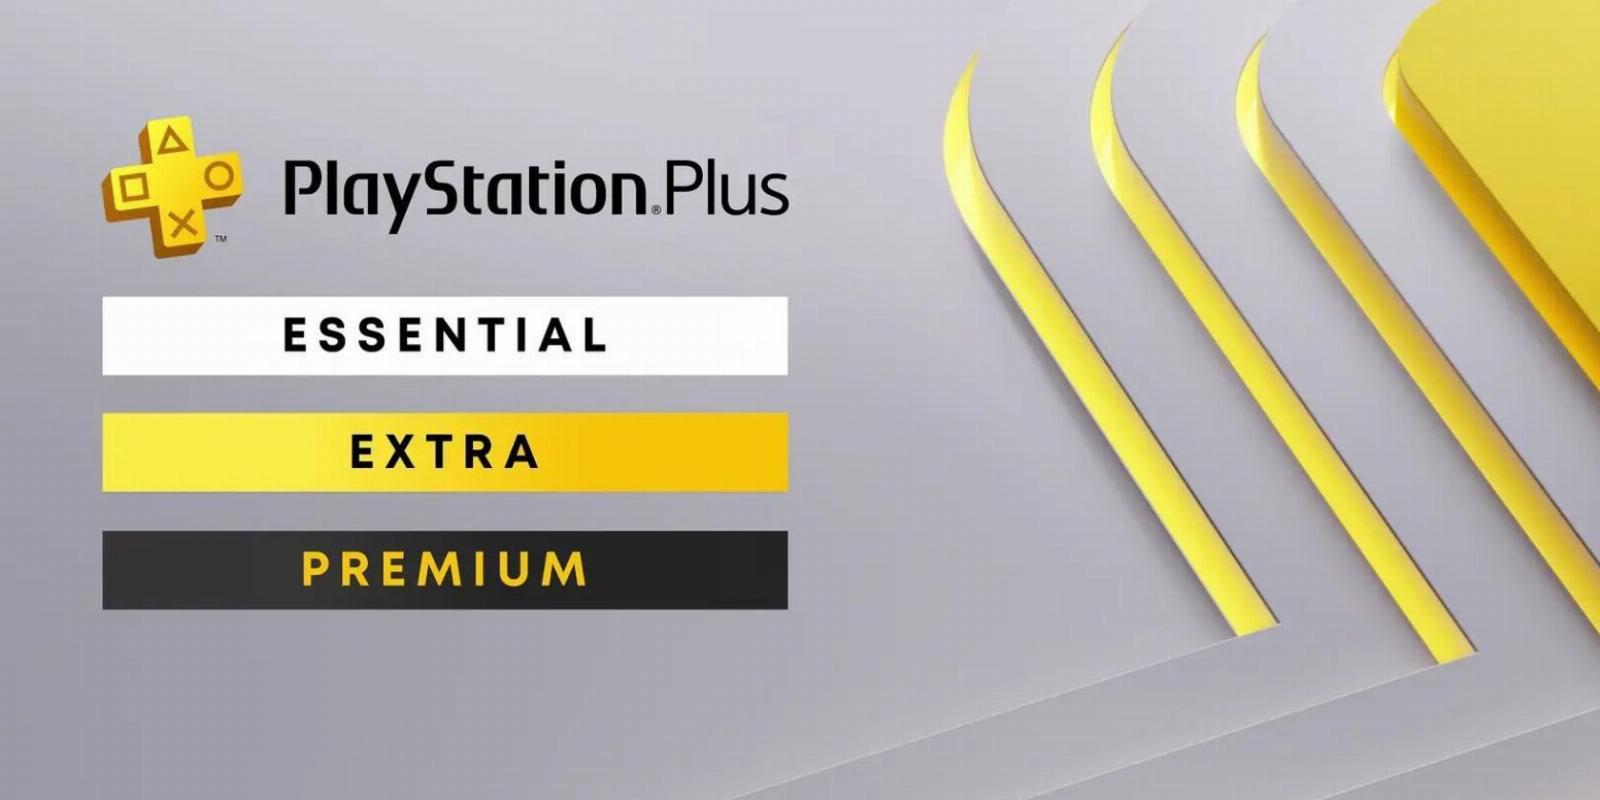 PlayStation Plus Essential vs. Extra vs. Premium: Which Should You Choose?